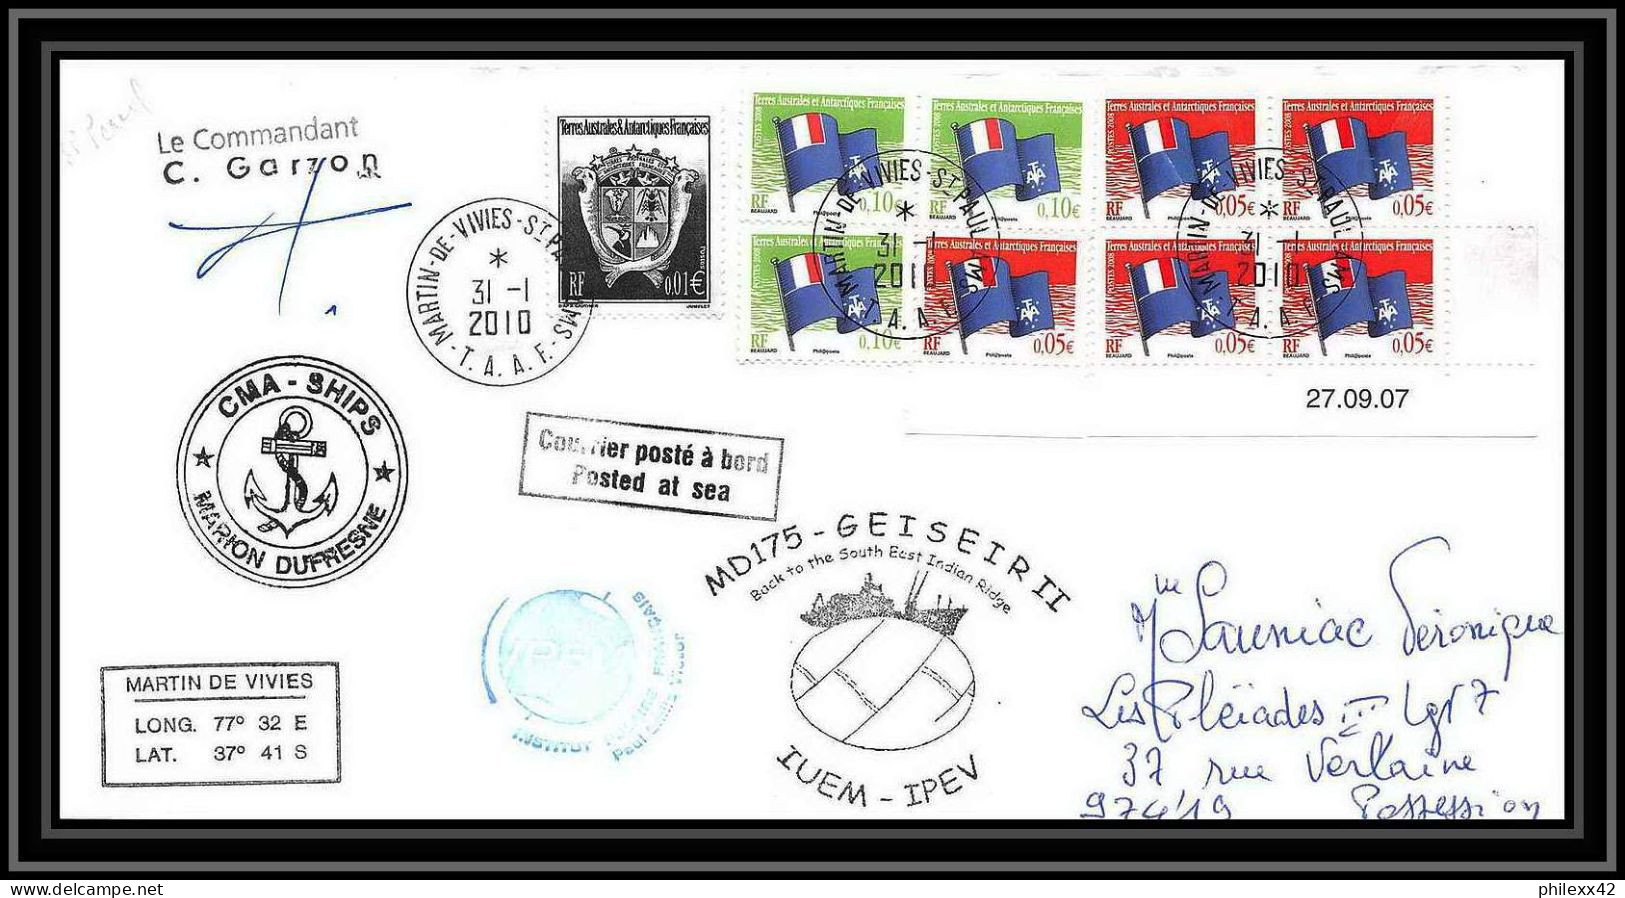 2986 ANTARCTIC Terres Australes TAAF Lettre Cover Dufresne 2 Signé Signed MD 175 31/1/2010 N°496 COIN DATE - Expéditions Antarctiques